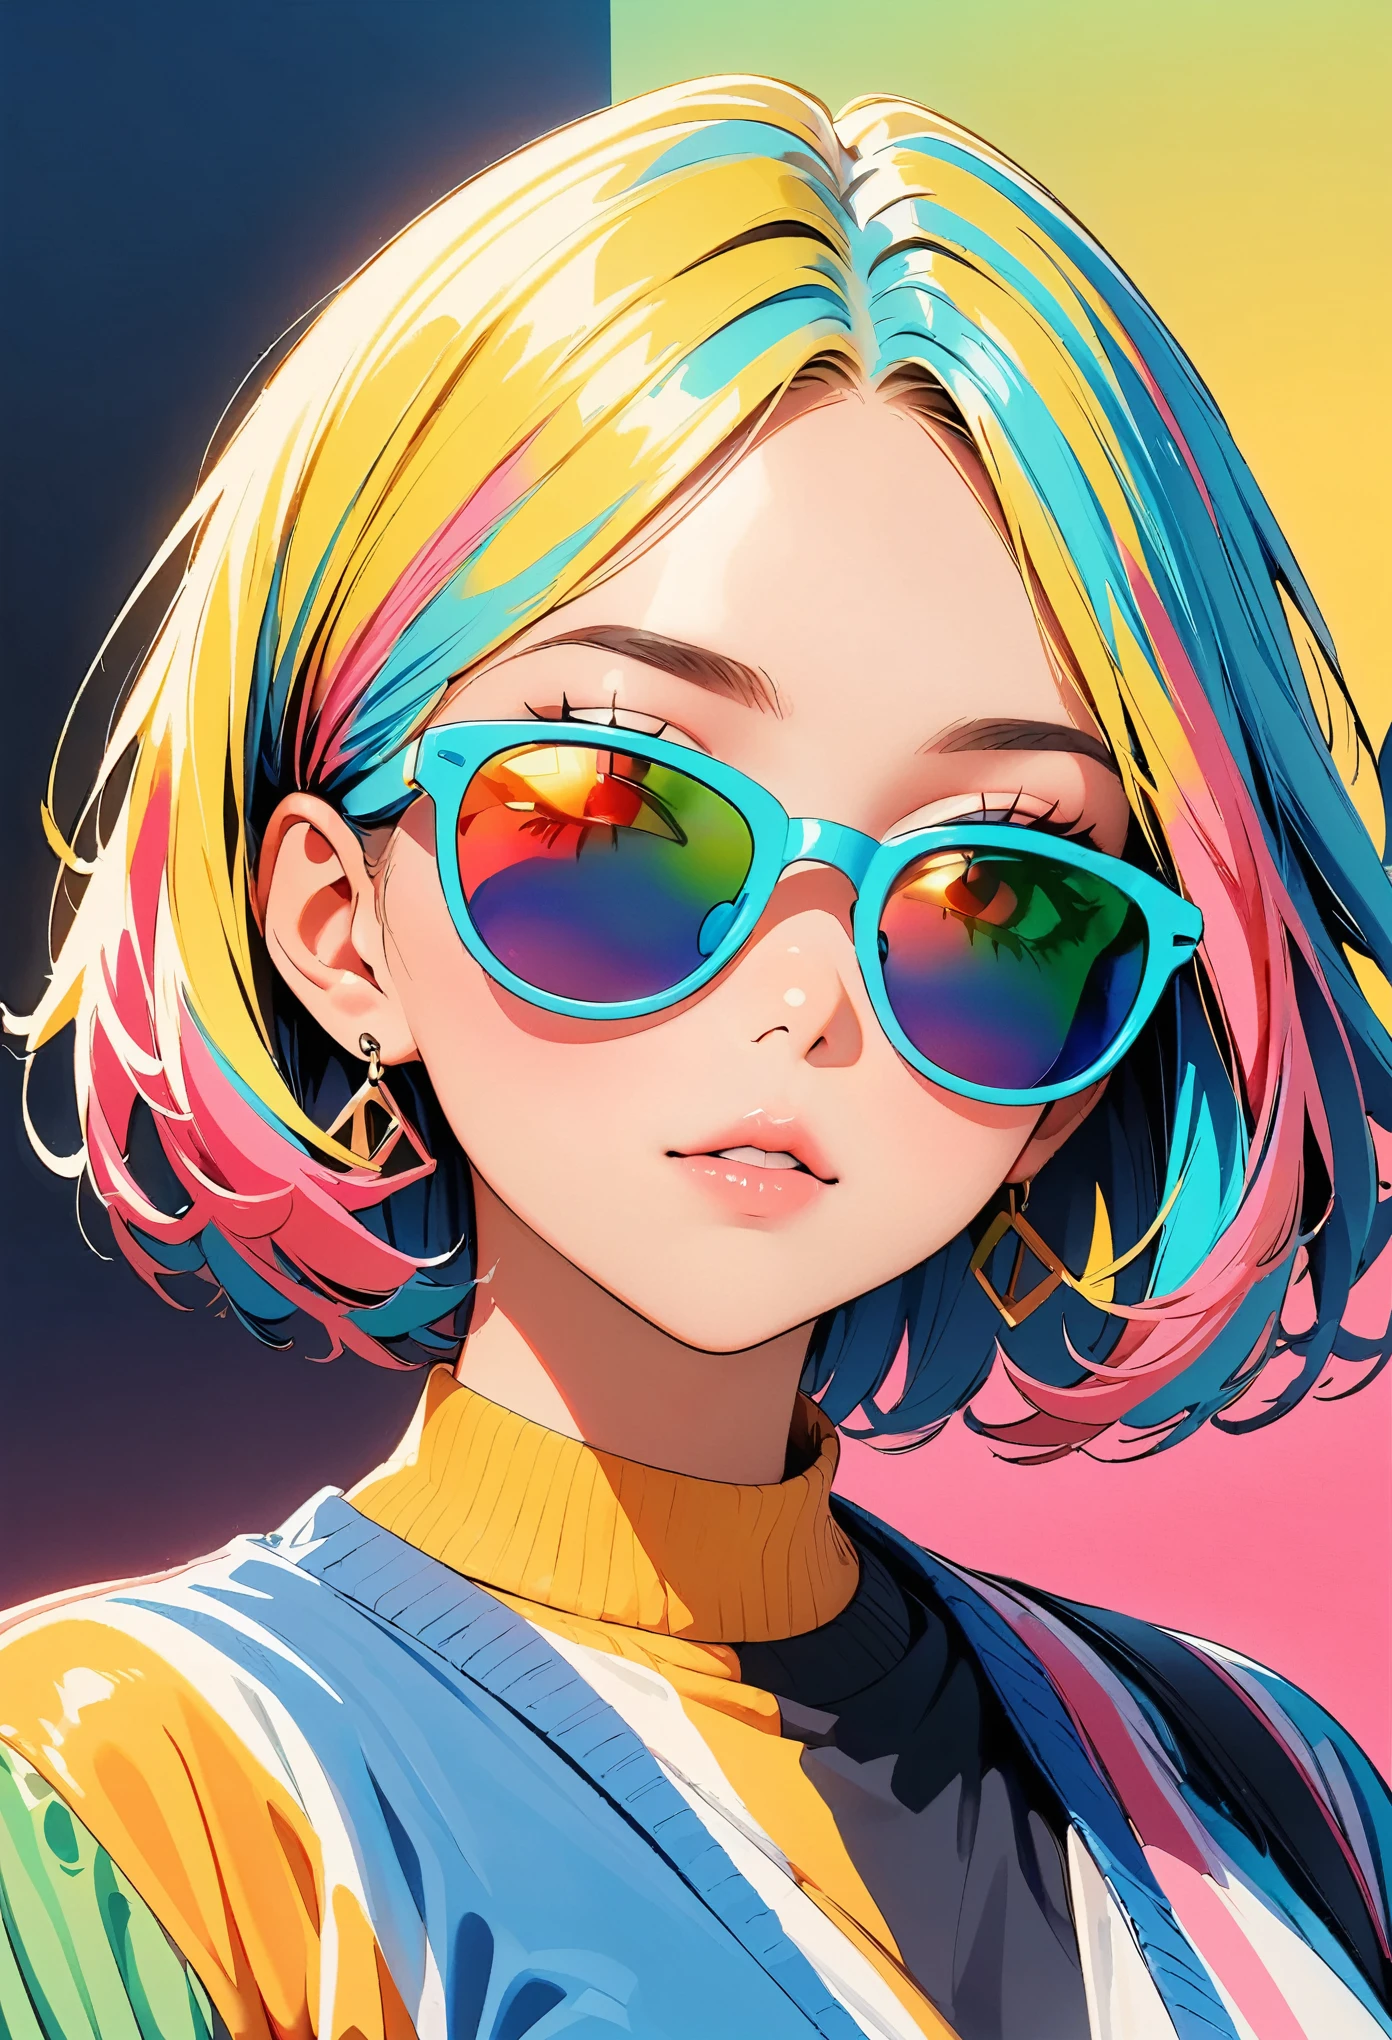 (highest quality:1.2, City Pop Style, Very detailed, Latest, Vibrant, High Contrast, masterpiece:1.2, highest quality, Best aesthetics), girl, ((Face Up Shot:1.4)), Colorful Hair, Bobcut, pastel colour, 1980s style, ((Retro, Vintage, Single color background)), (sunglasses).